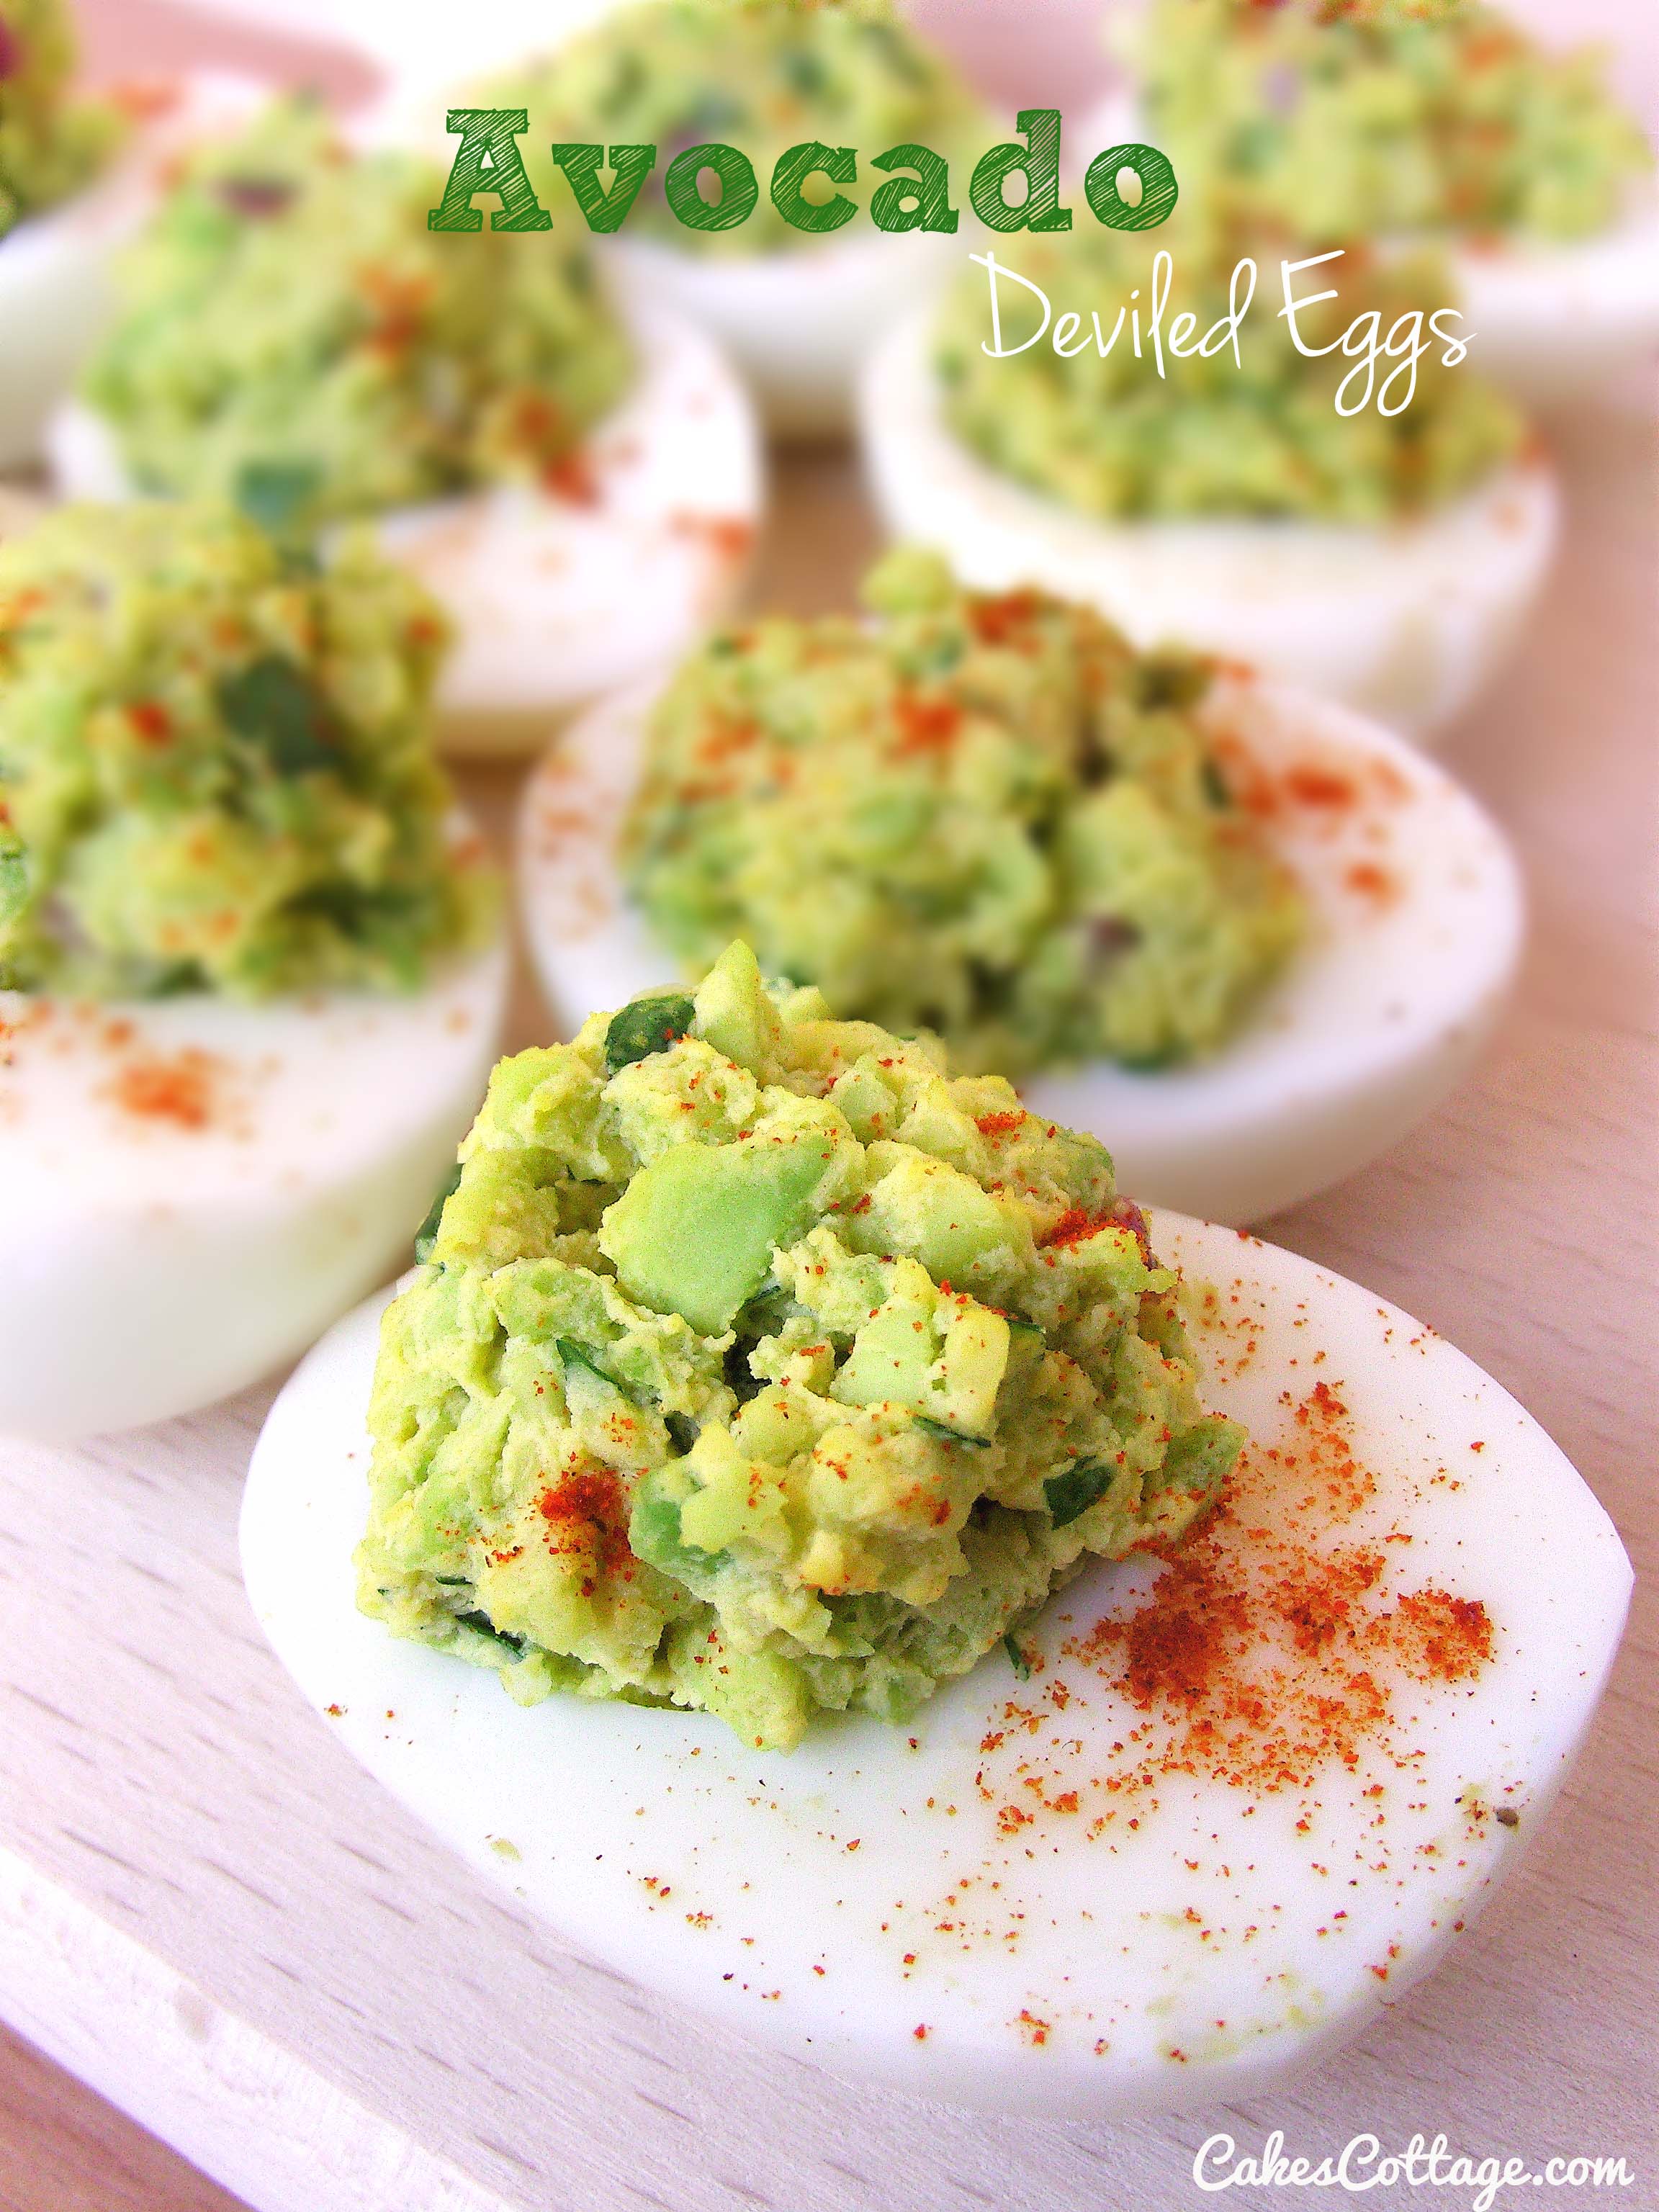 Avocado Deviled Eggs - An easy way to twist your deviled egg recipe for Easter.